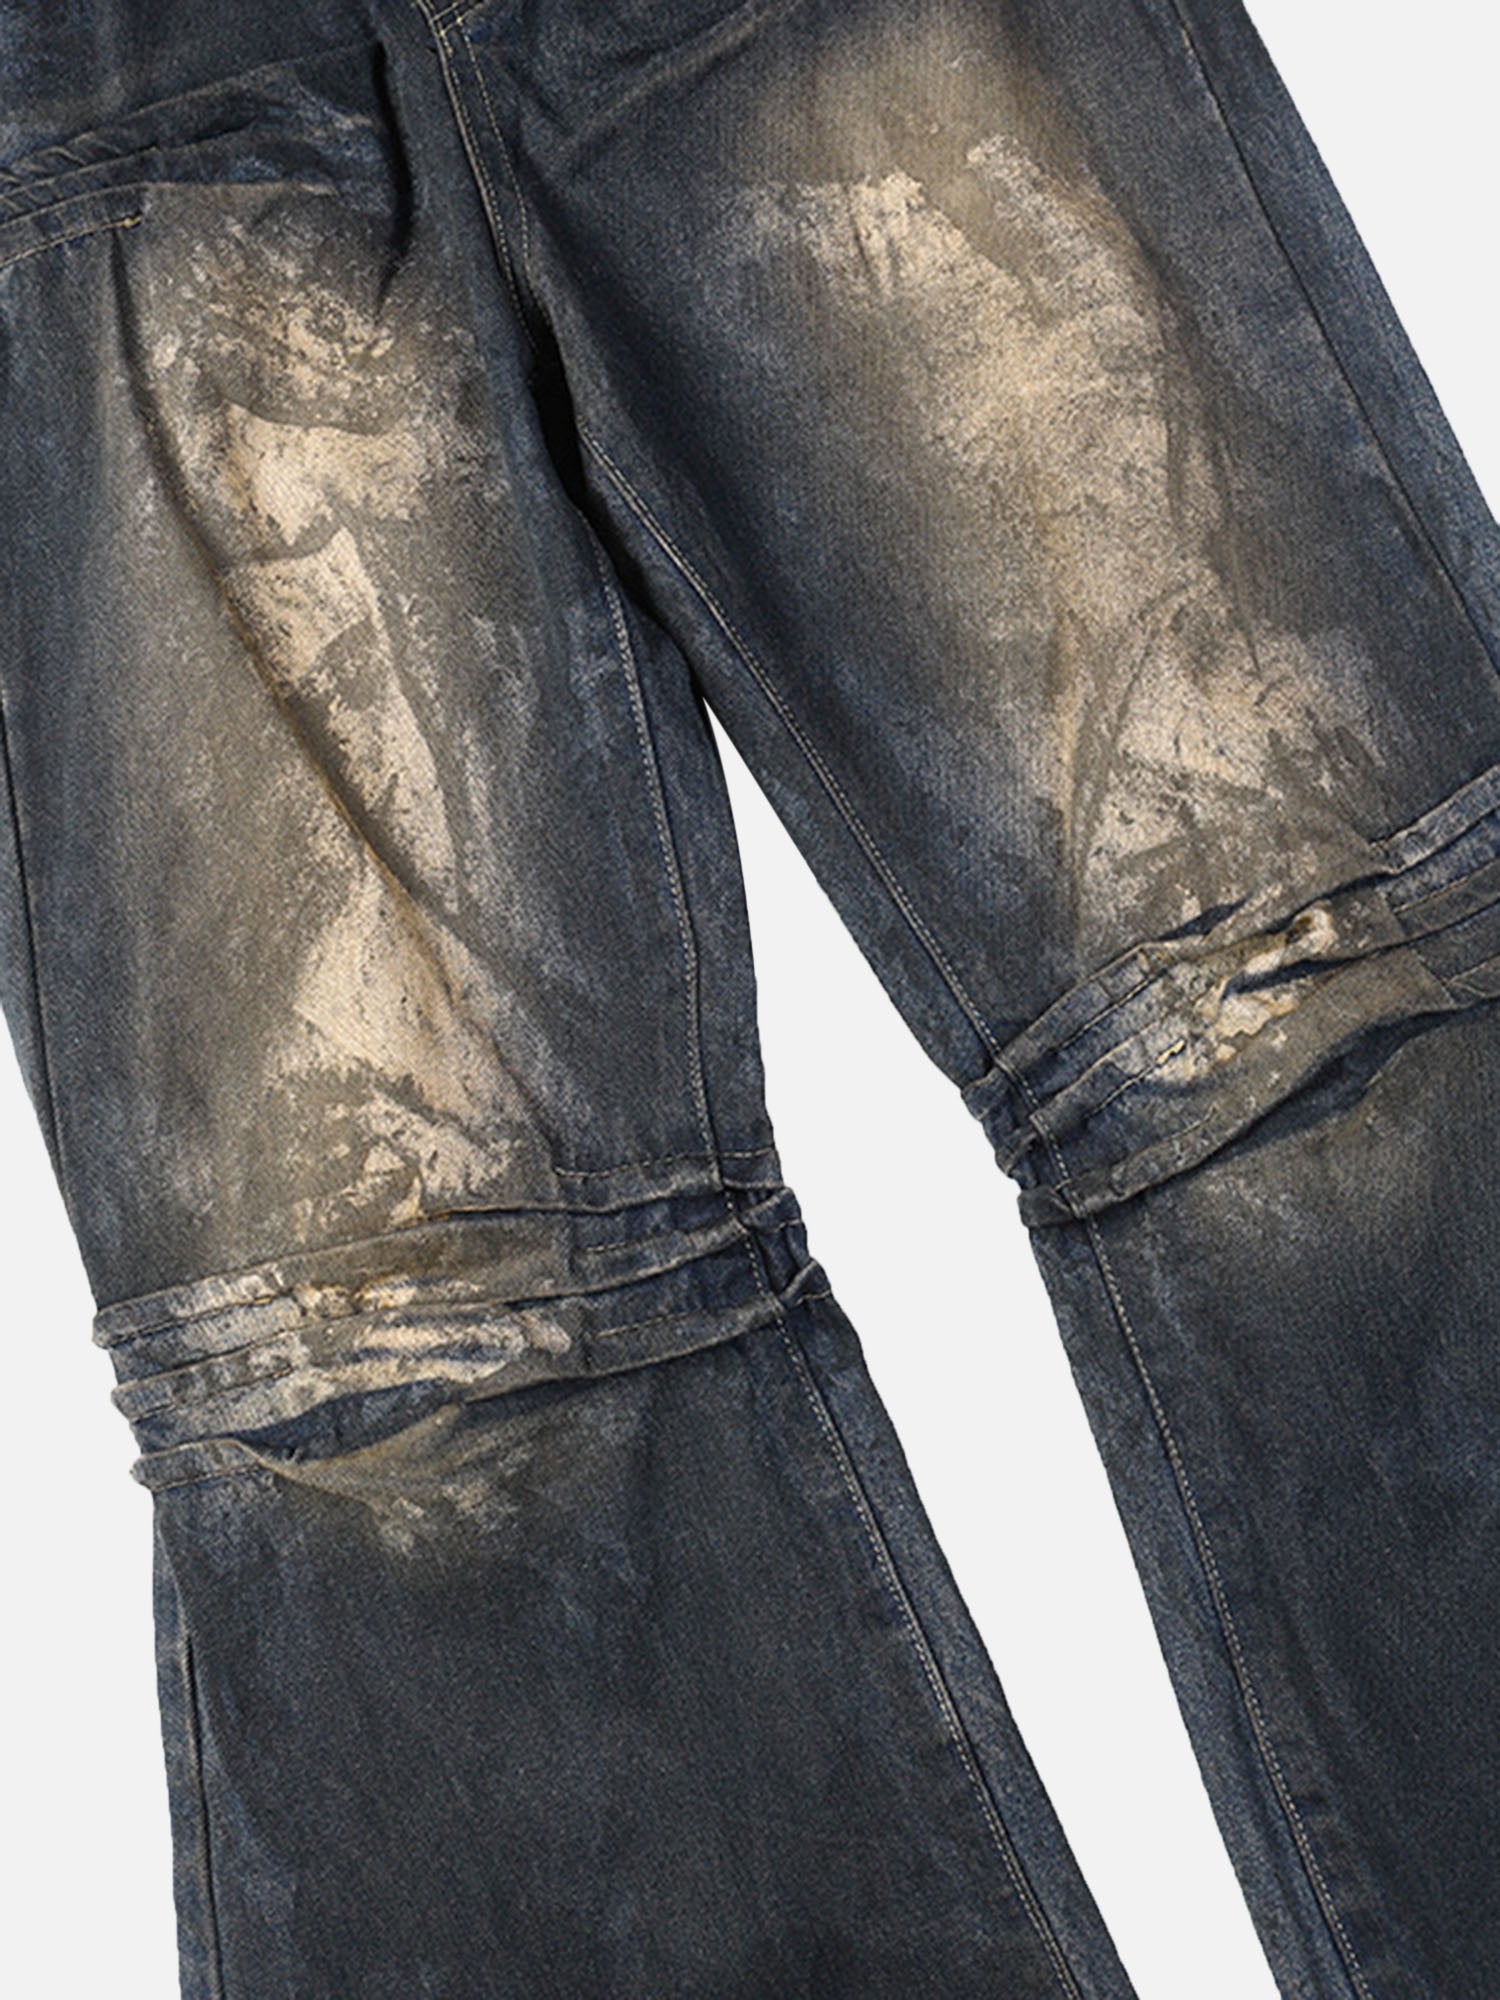 Thesupermade American High Street Heavy Duty Washed Jeans